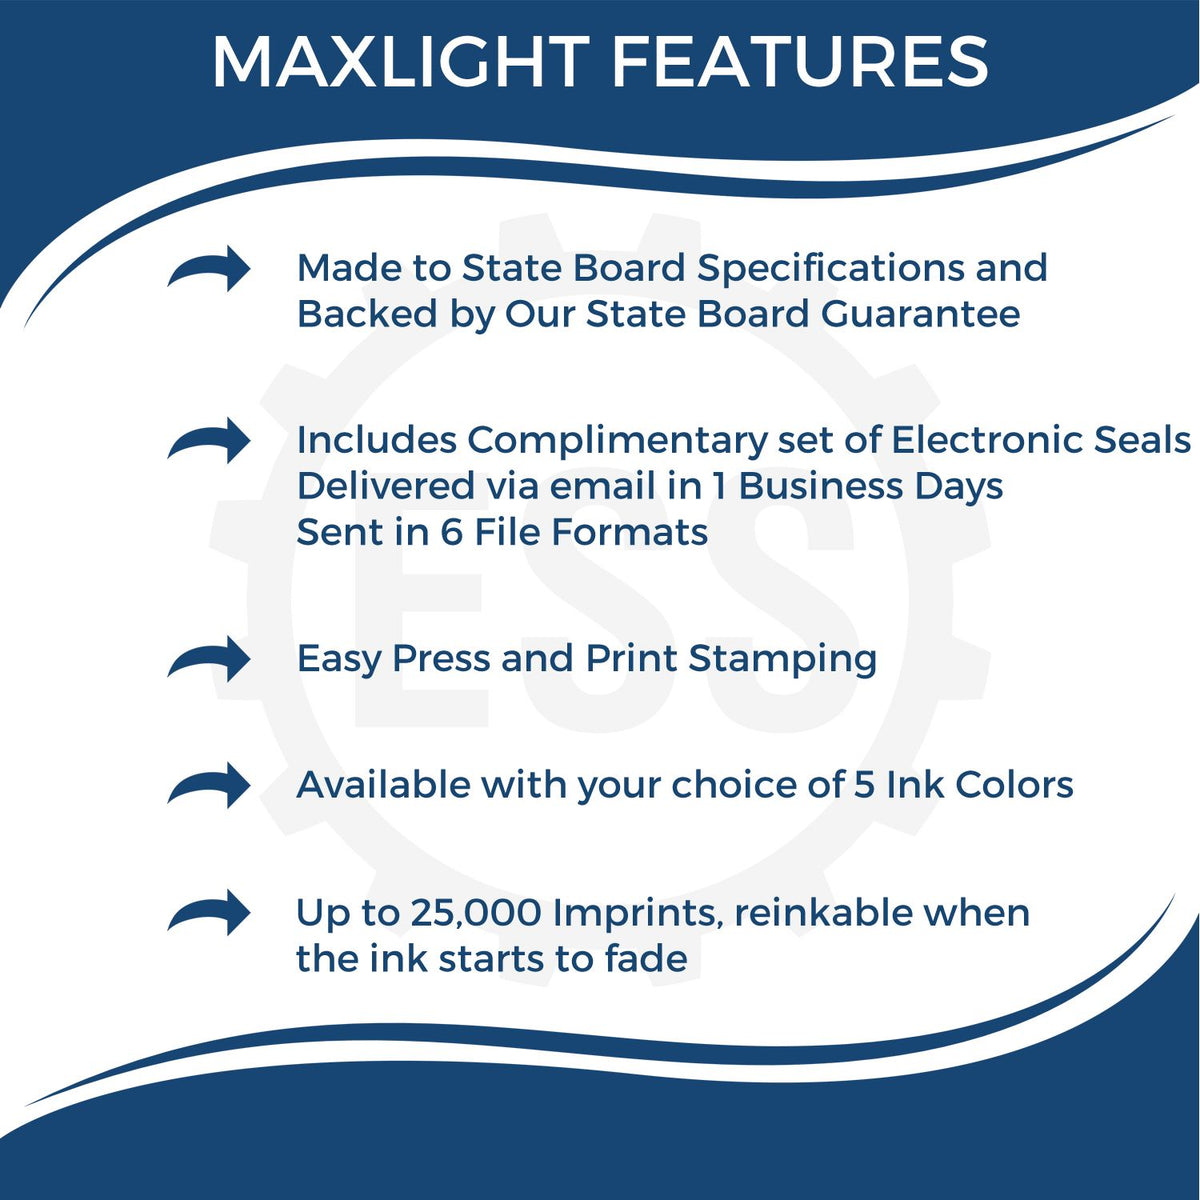 A picture of an infographic highlighting the selling points for the Premium MaxLight Pre-Inked Washington Engineering Stamp